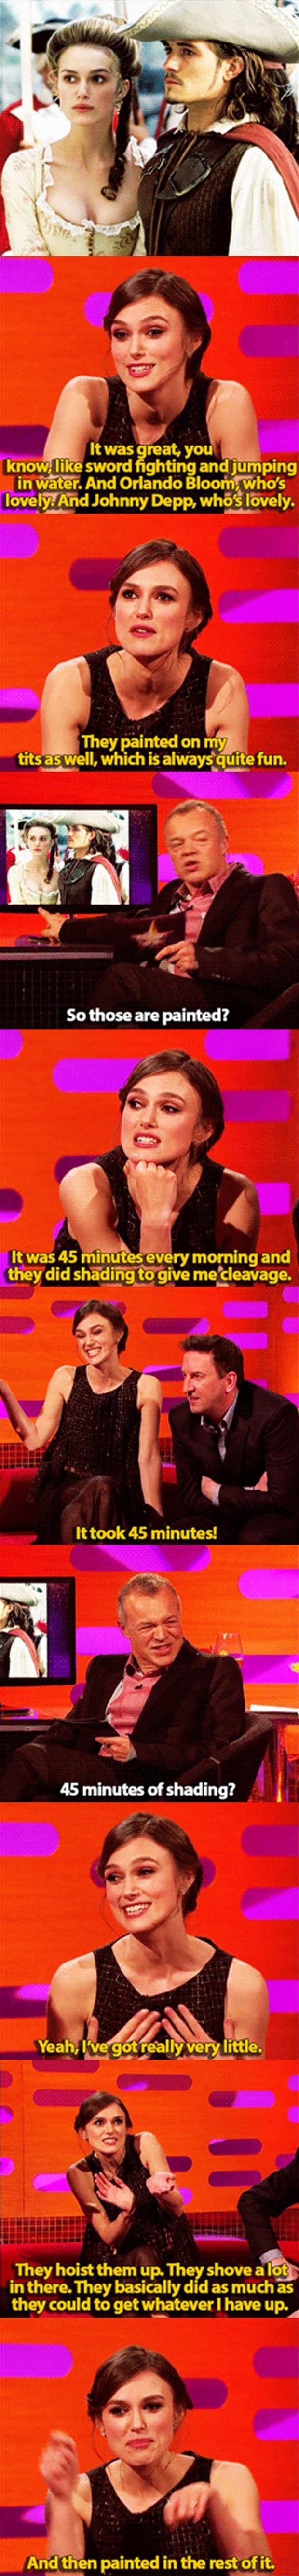 Keira Knightley on her boob makeup